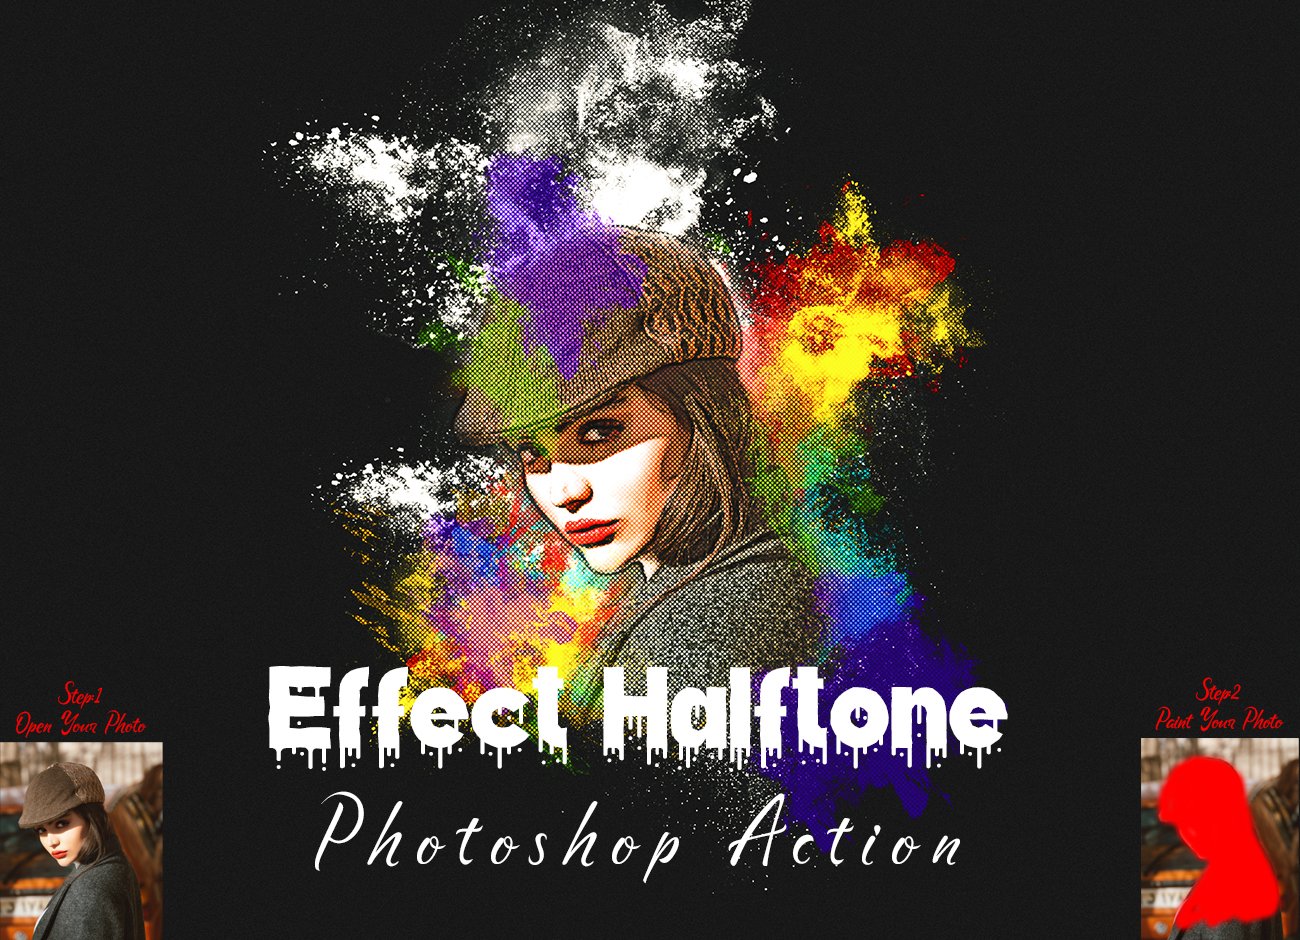 Effect Halftone Photoshop Actioncover image.